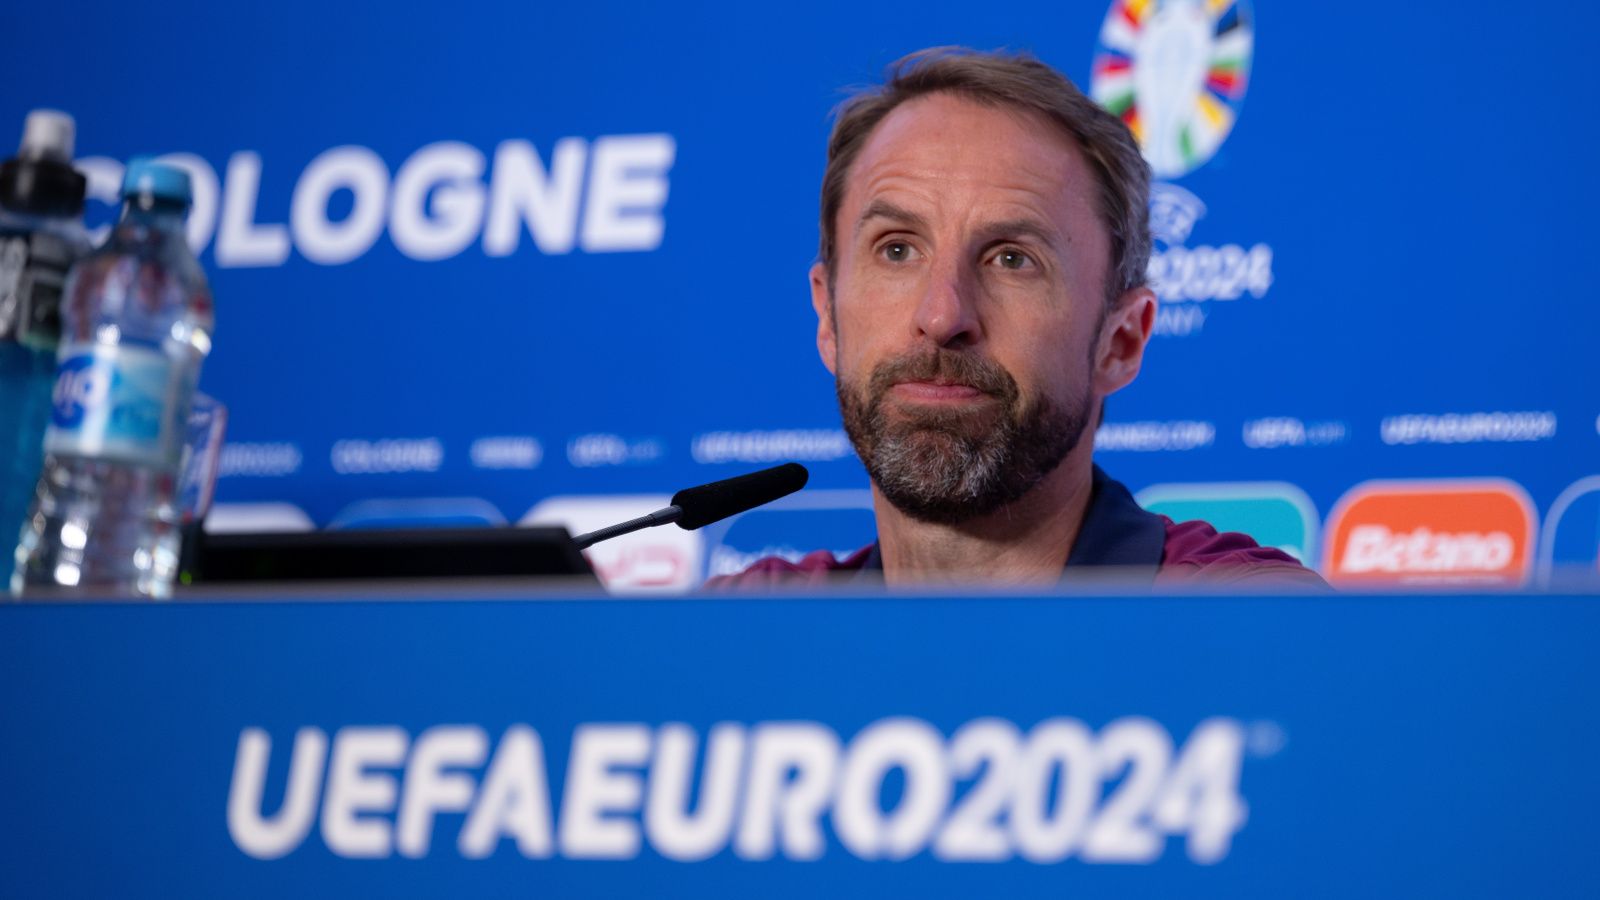 Gareth Southgate shrugs off Euros criticism and says he's 'oblivious' to it ahead of England v Slovenia game